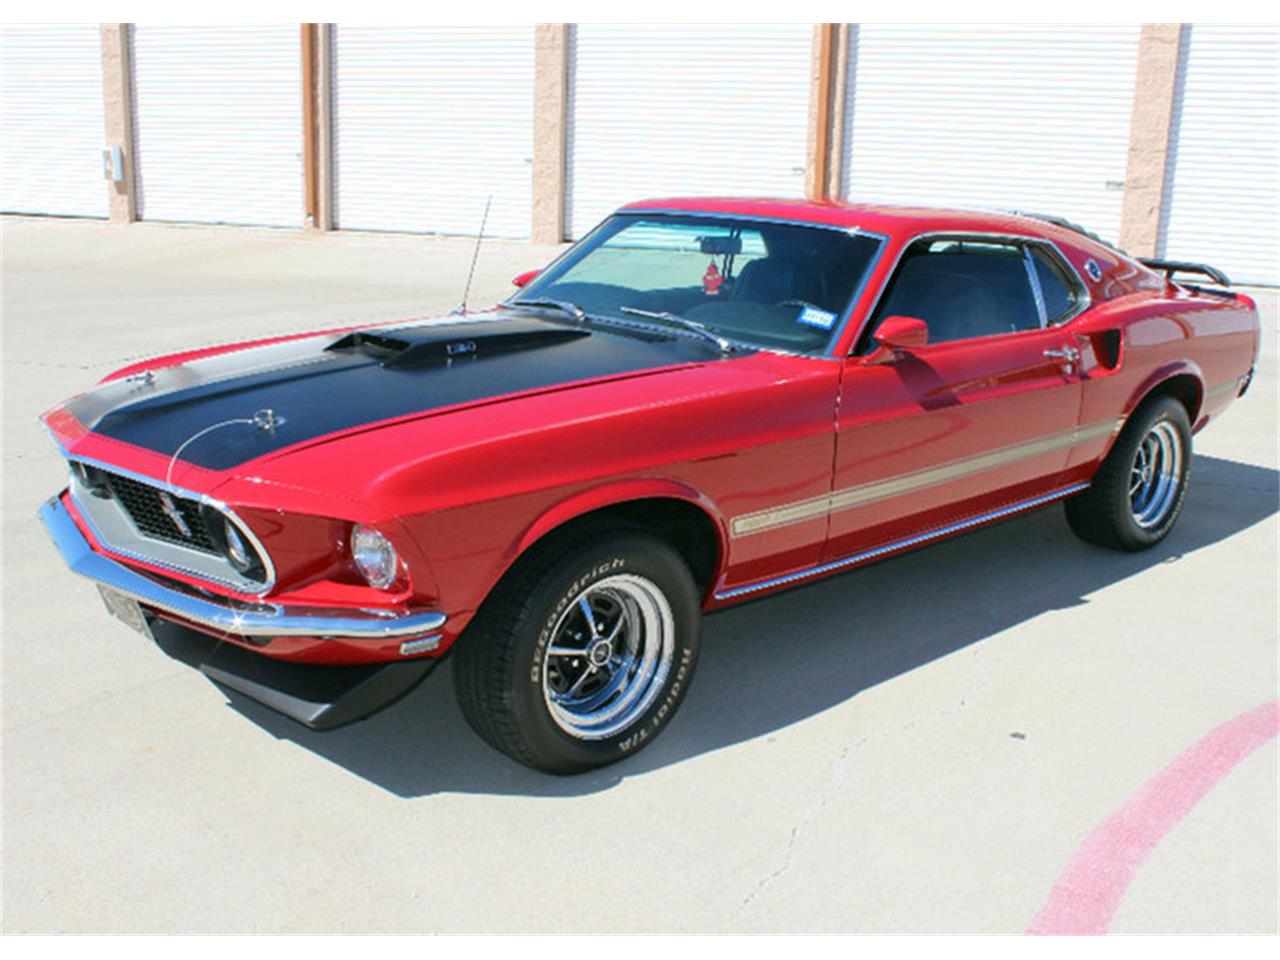 1969 Ford Mustang Mach 1 Tribute for Sale | ClassicCars.com | CC-1064312